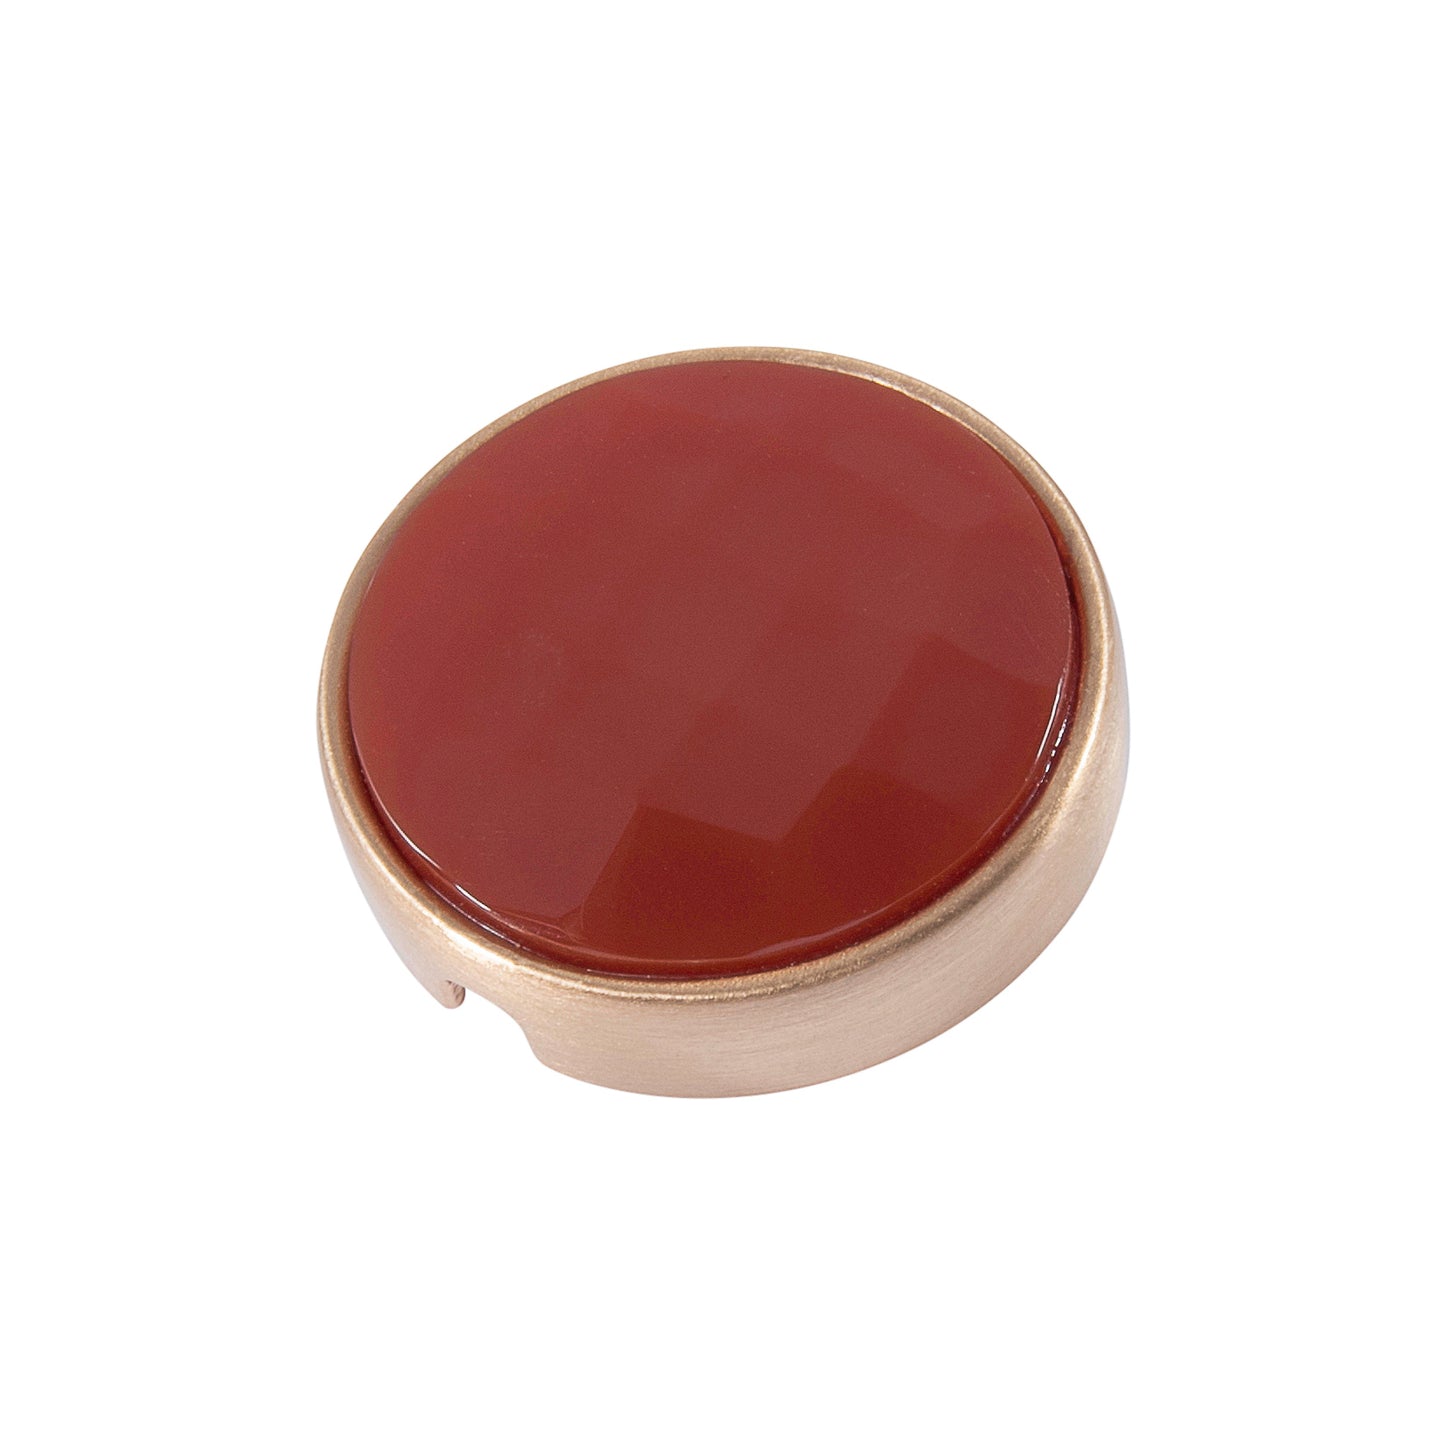 21mm button in brushed gold metal and faceted red onyx